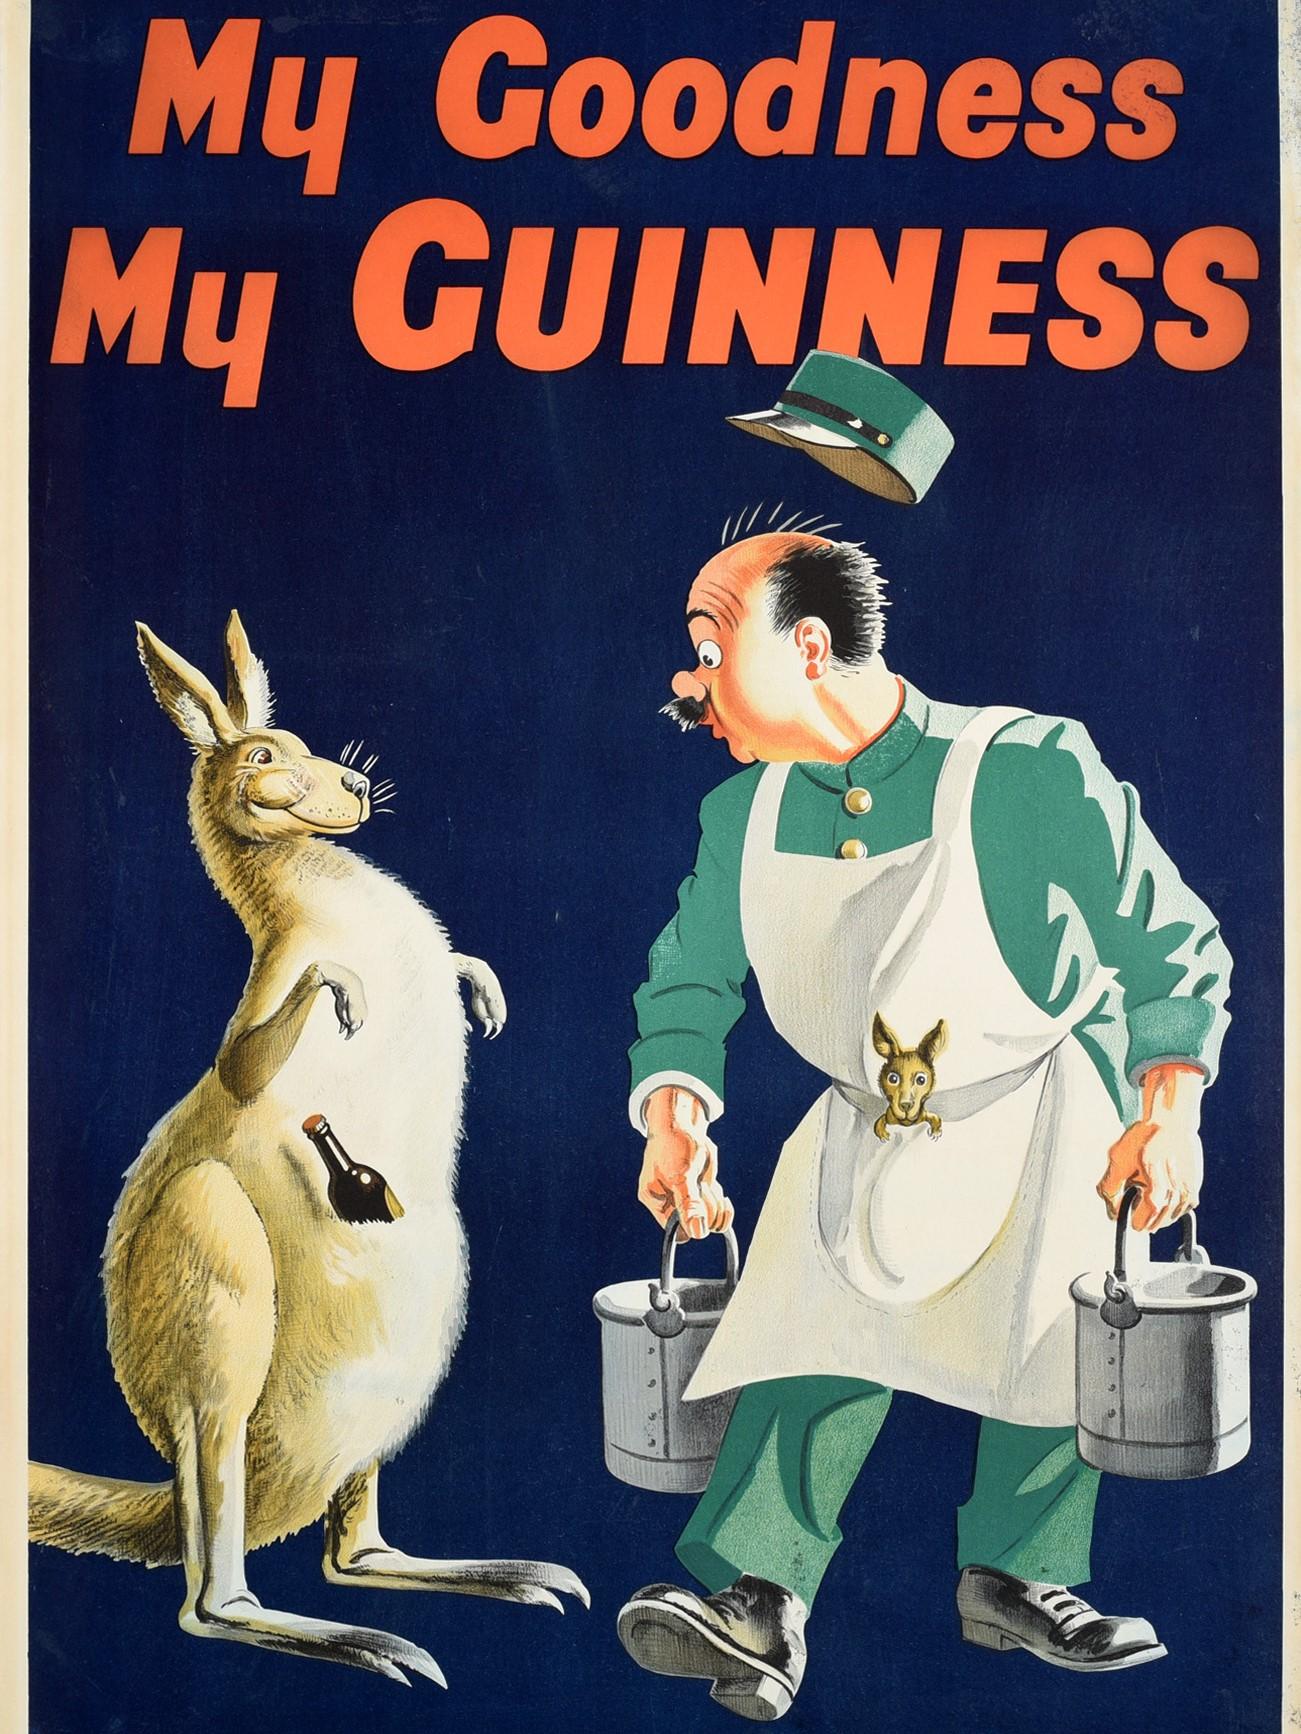 my goodness my guinness poster